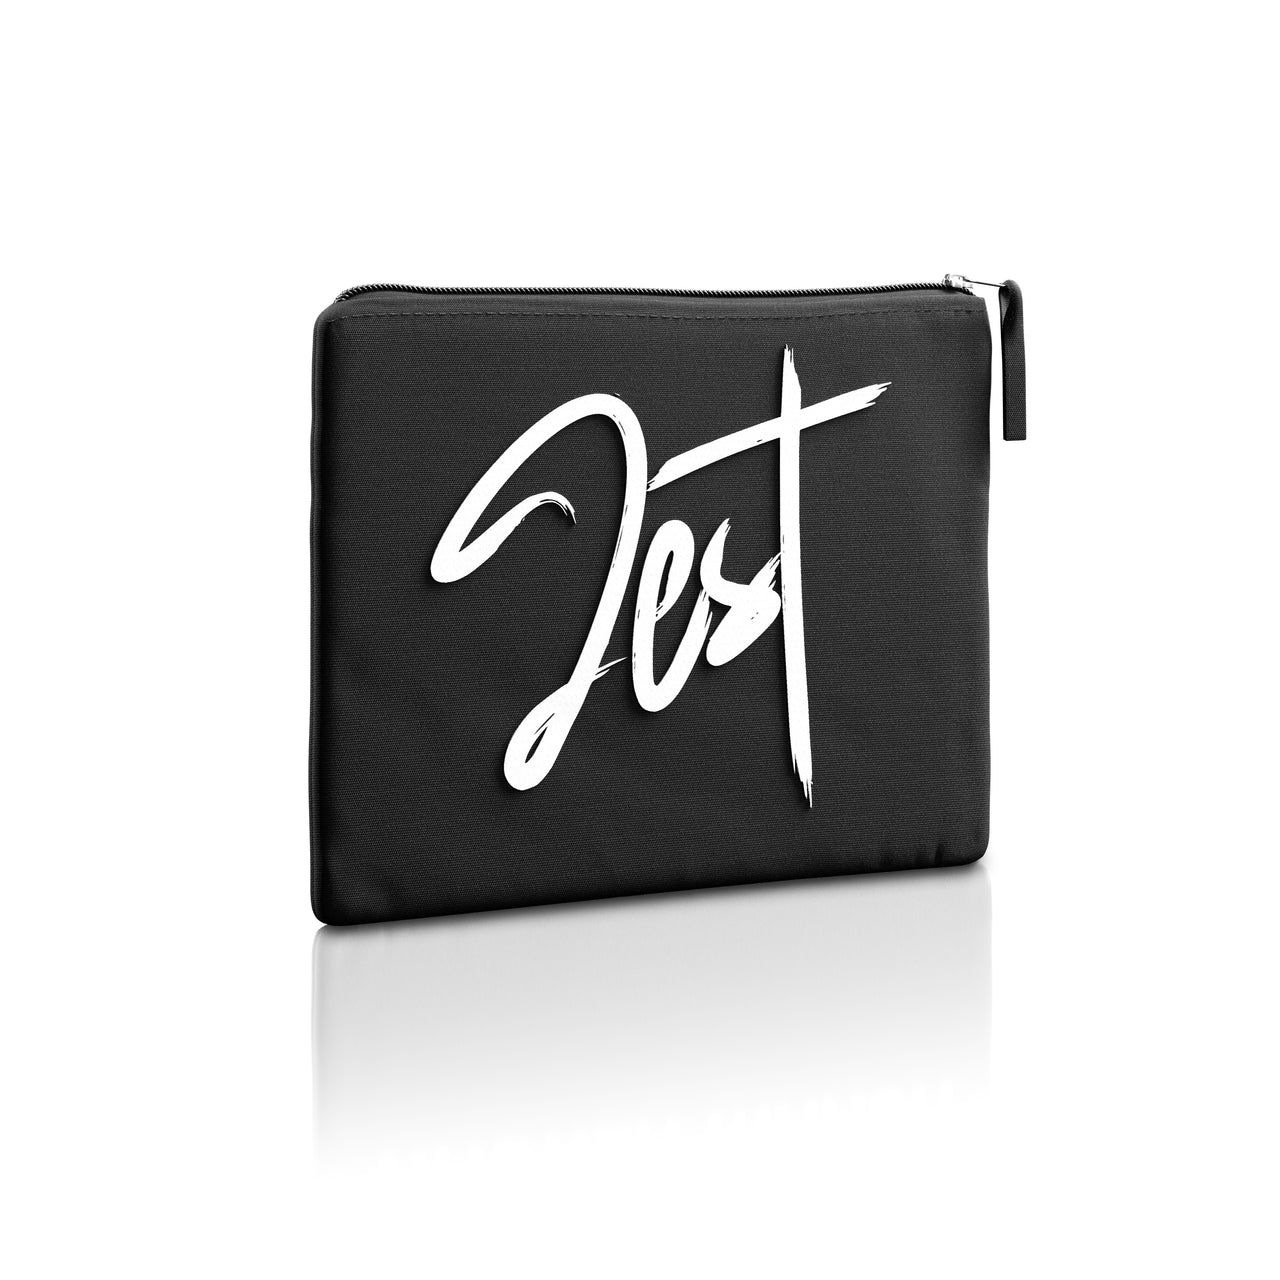 Andrea Maack-JEST Perfume Pouch